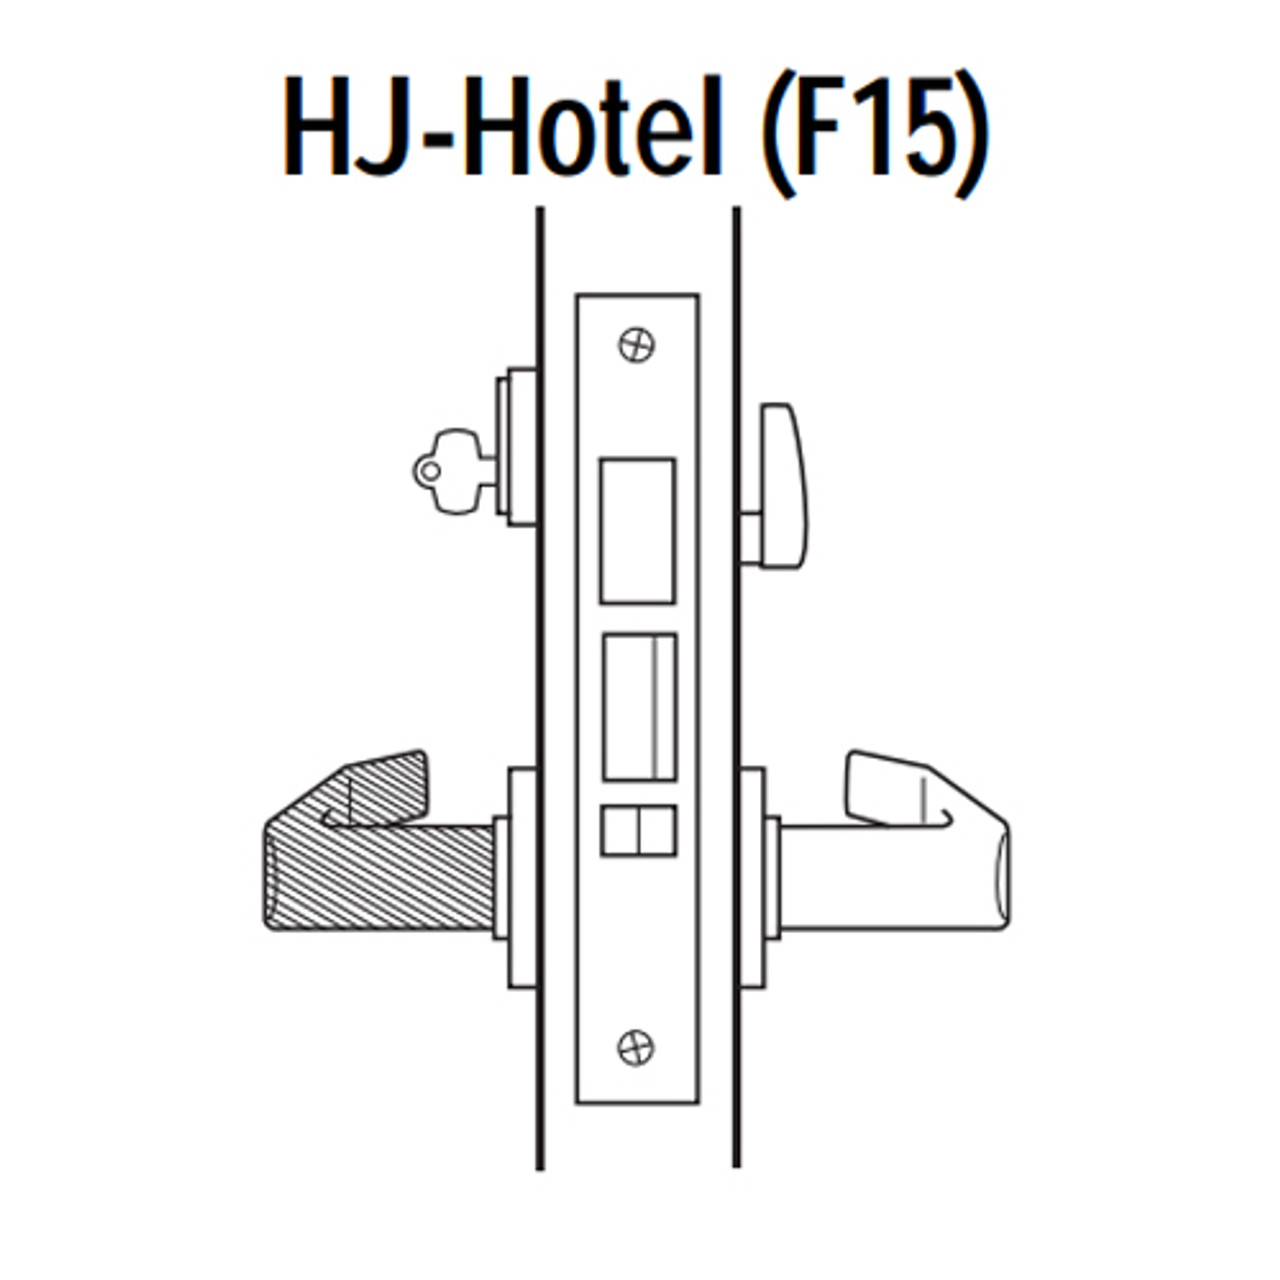 45H7HJ17LH612 Best 40H Series Hotel with Deadbolt Heavy Duty Mortise Lever Lock with Gull Wing LH in Satin Bronze